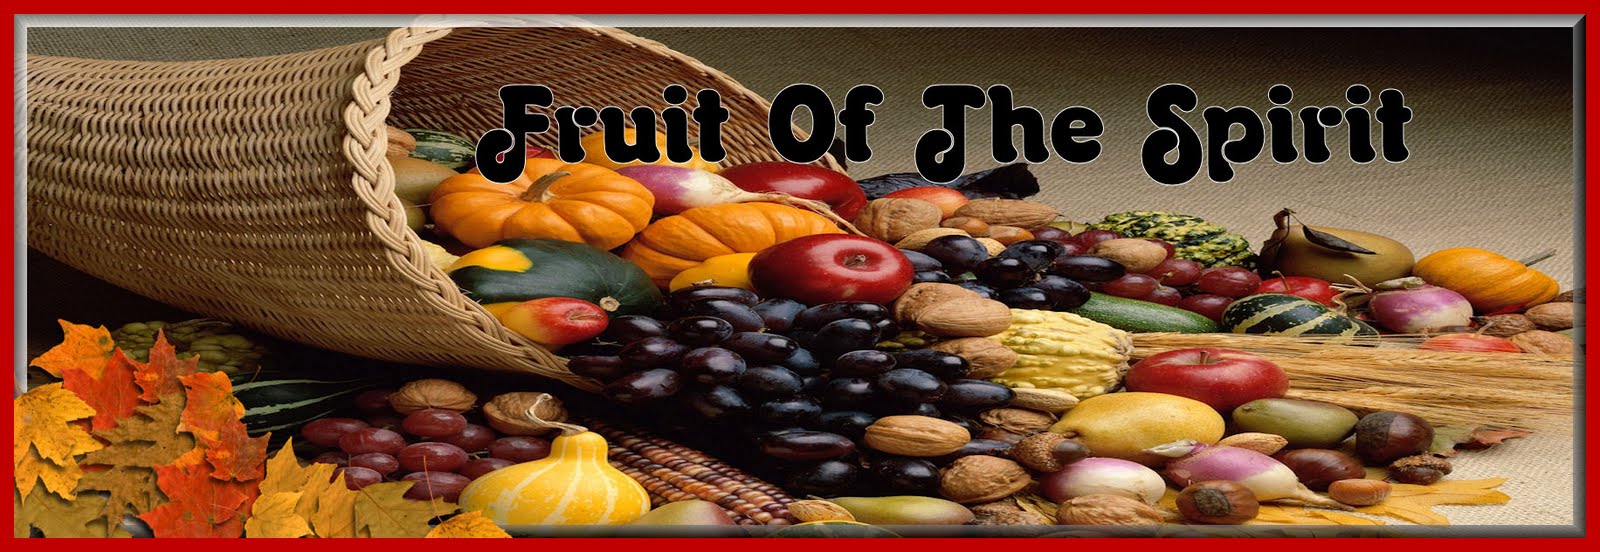 Christian Images In My Treasure Box: Fruit Of The Spirit Header